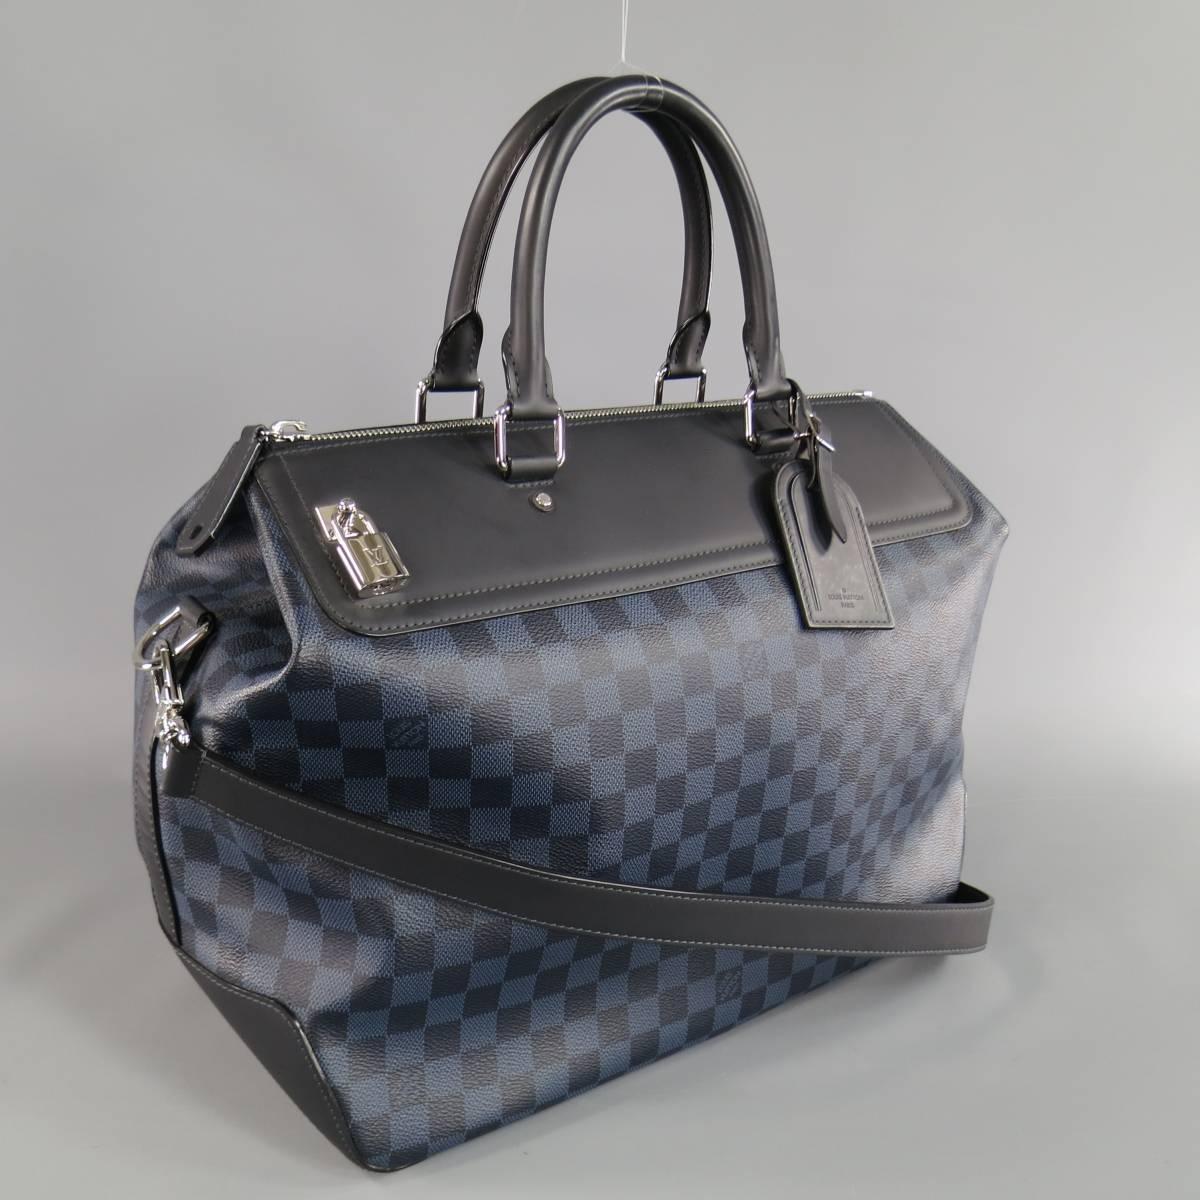 LOUIS VUITTON Cobalt Damier Canvas NEO GREENWICH PM Bag For Sale at 1stdibs